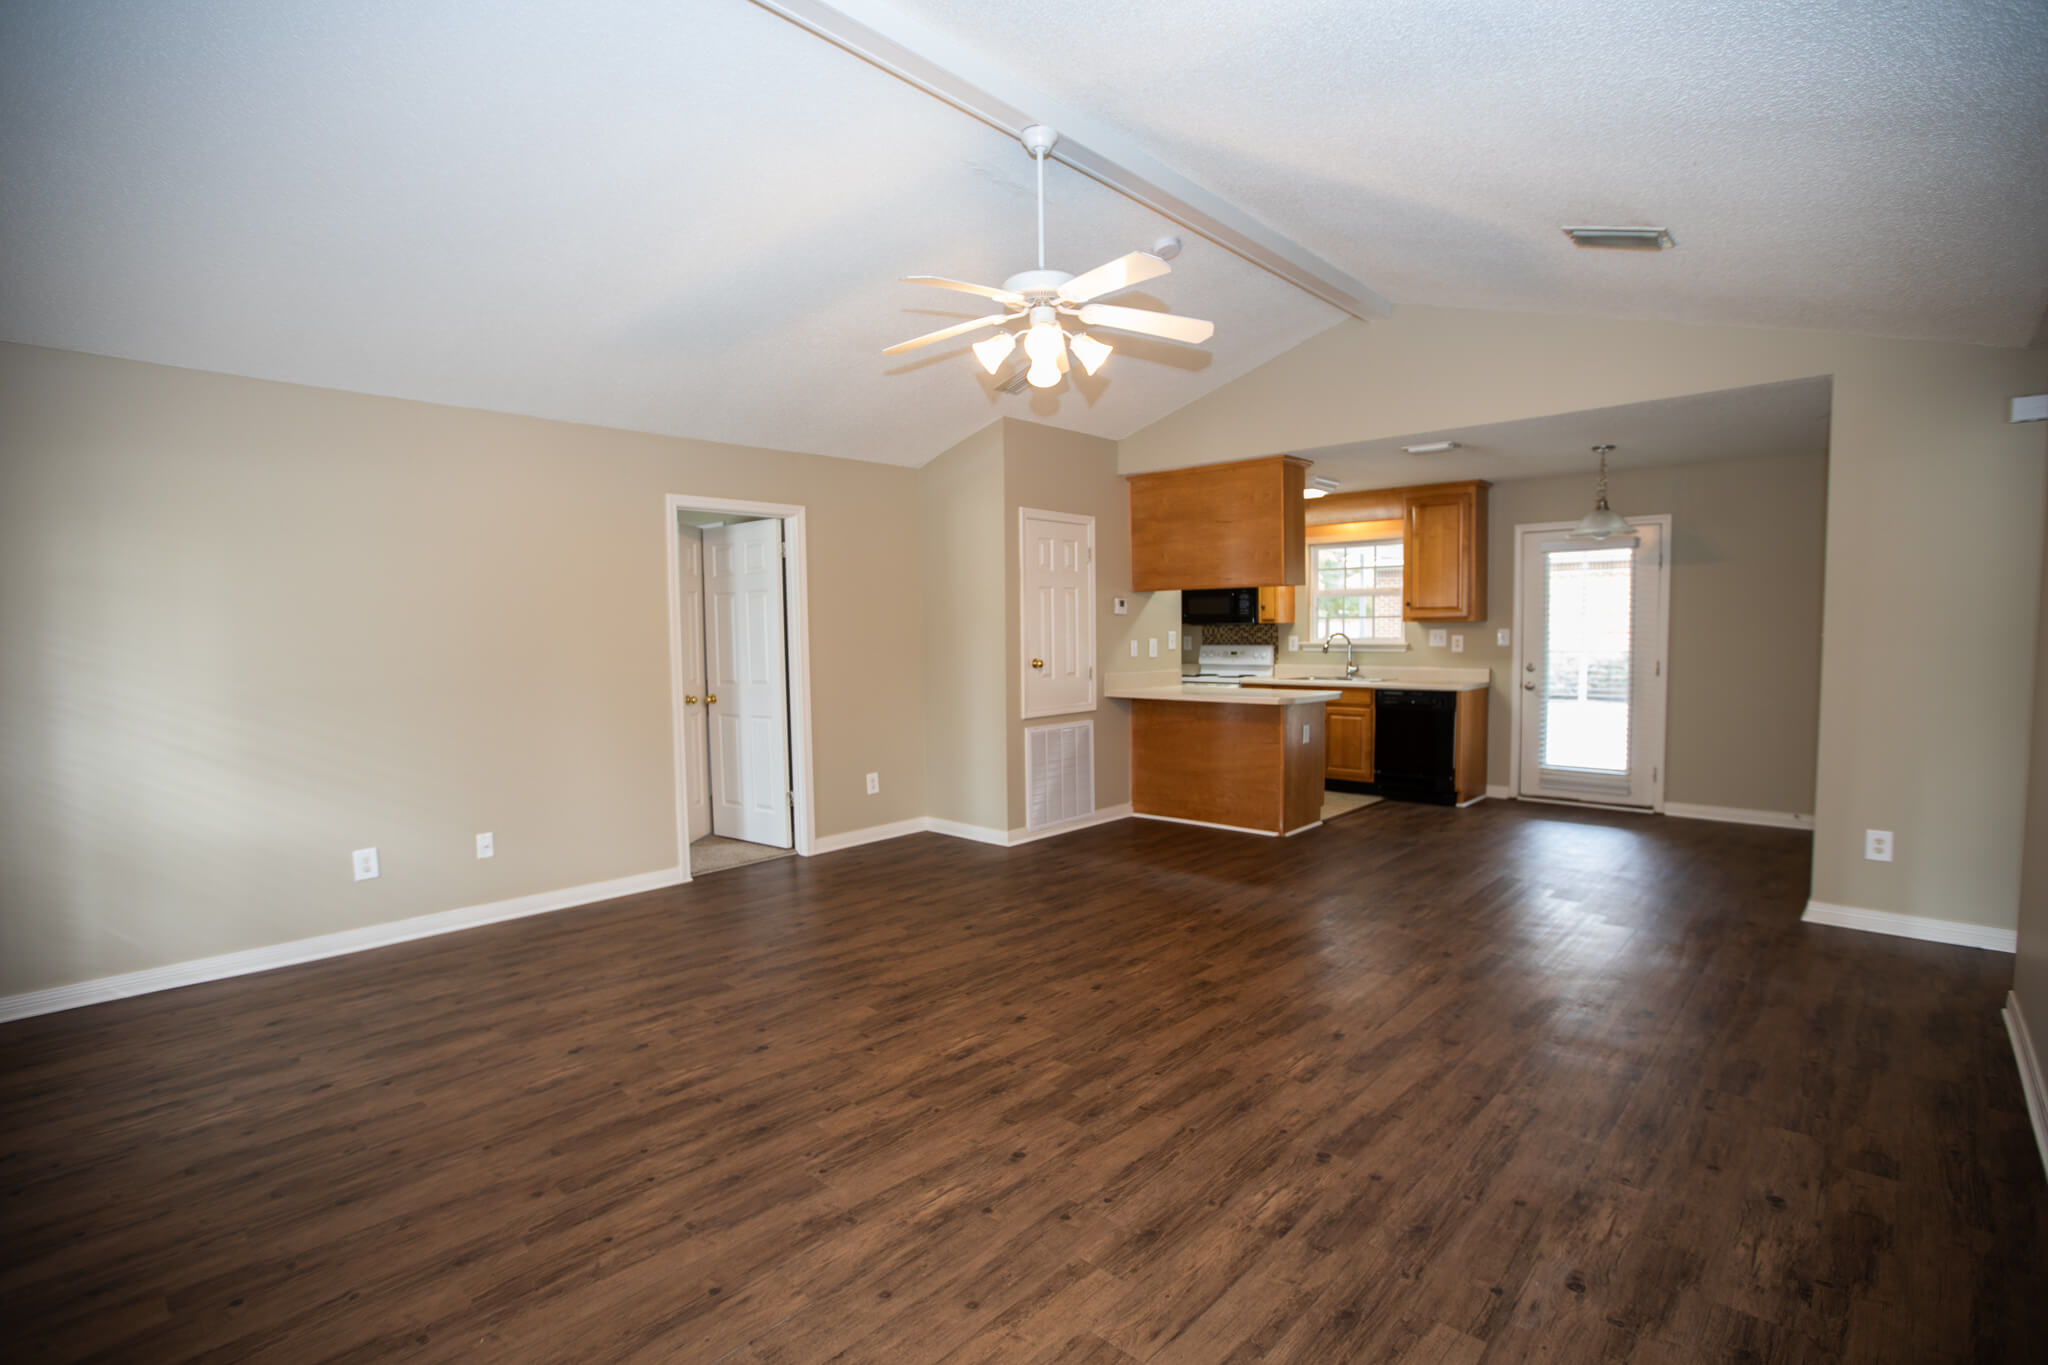 South Pointe Apartment & Rental Homes - 1209 Springfield